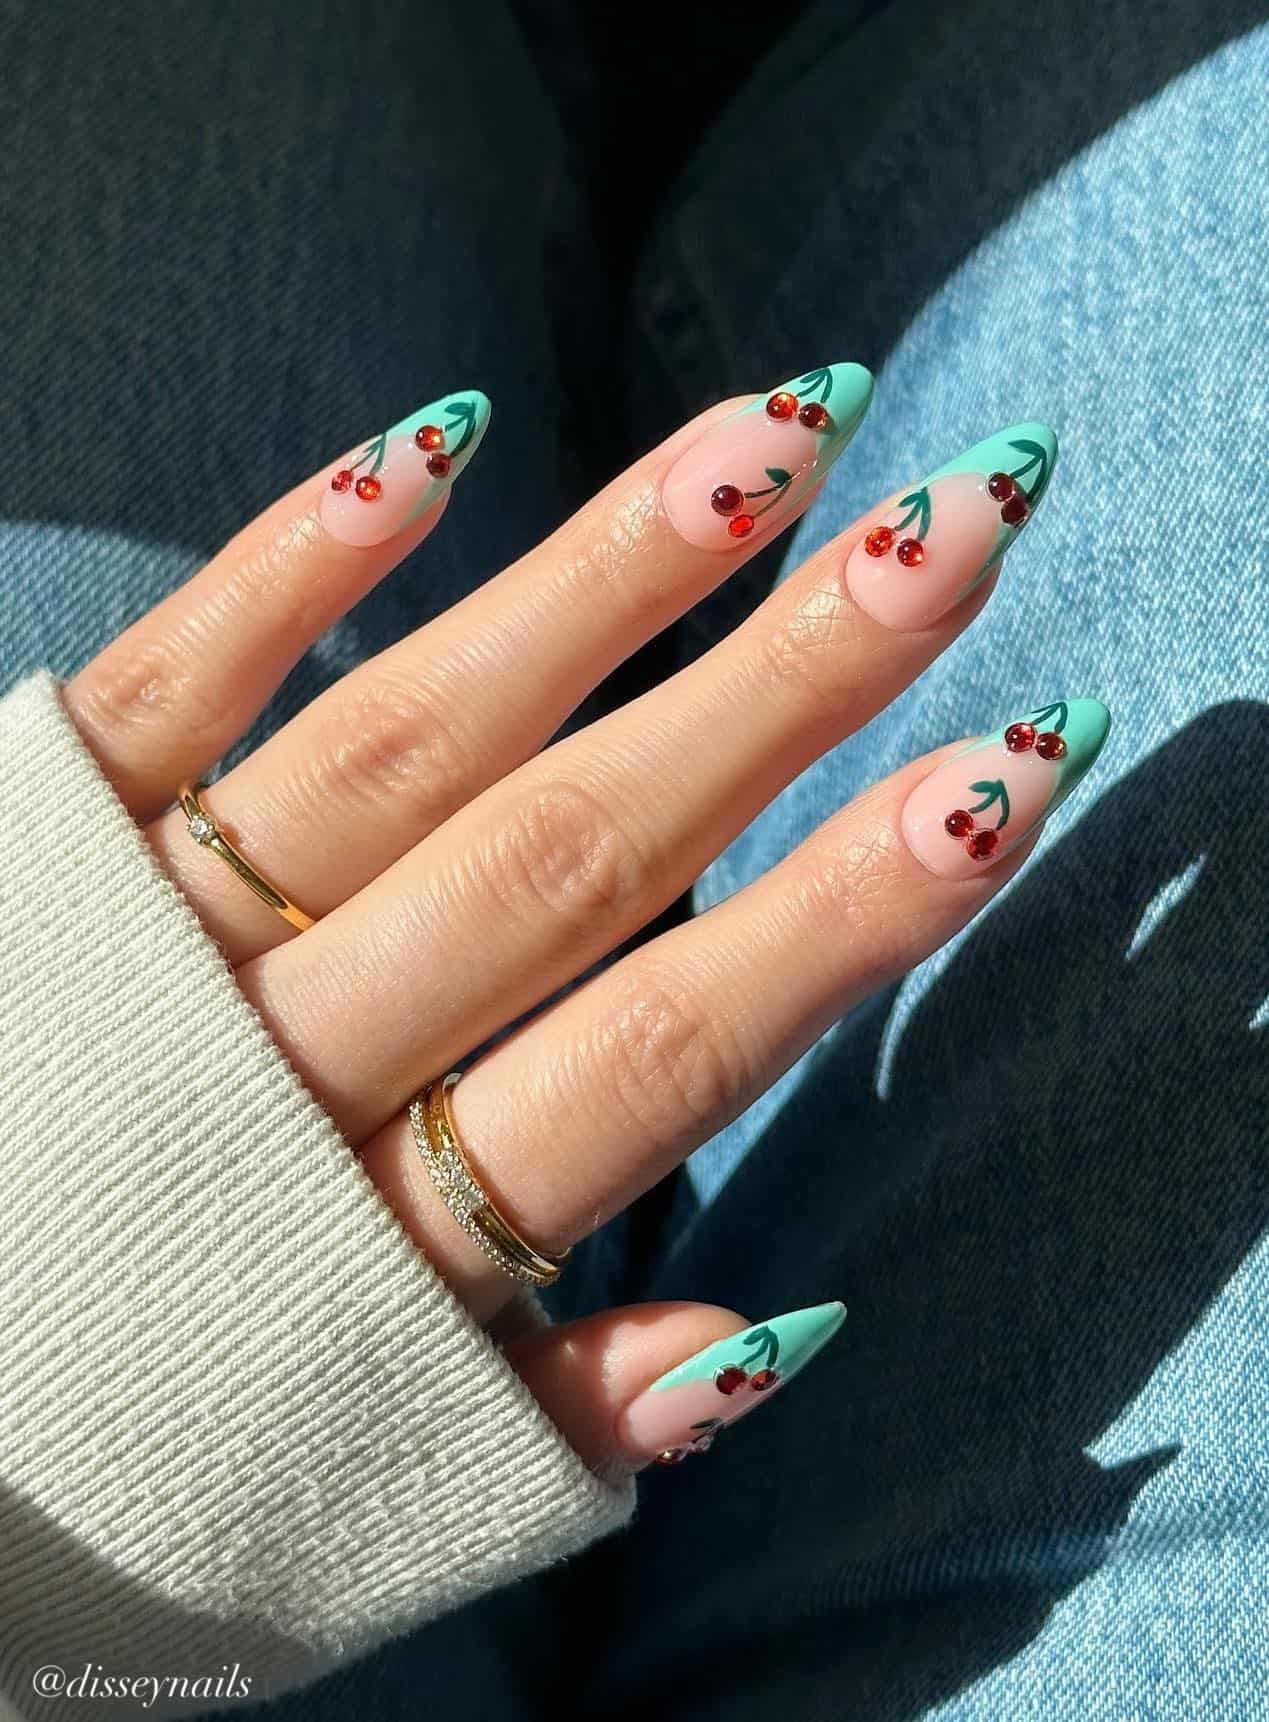 A hand with medium almond nails featuring mint green French tips and cherry nail art featuring red gem accents